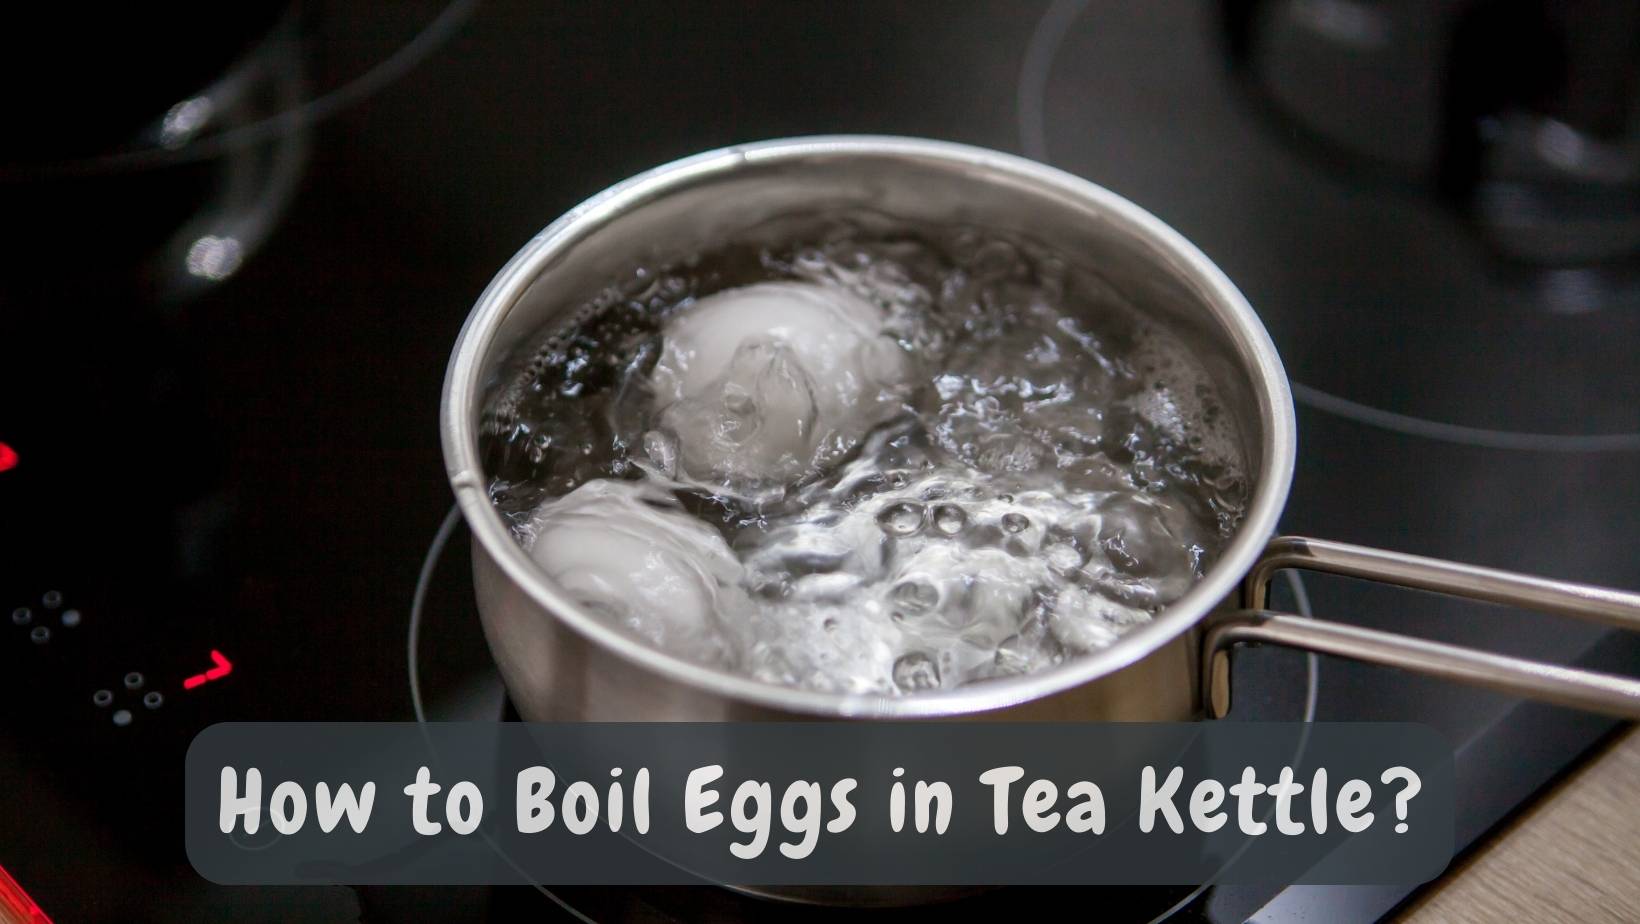 How to Boil Eggs in Tea Kettle